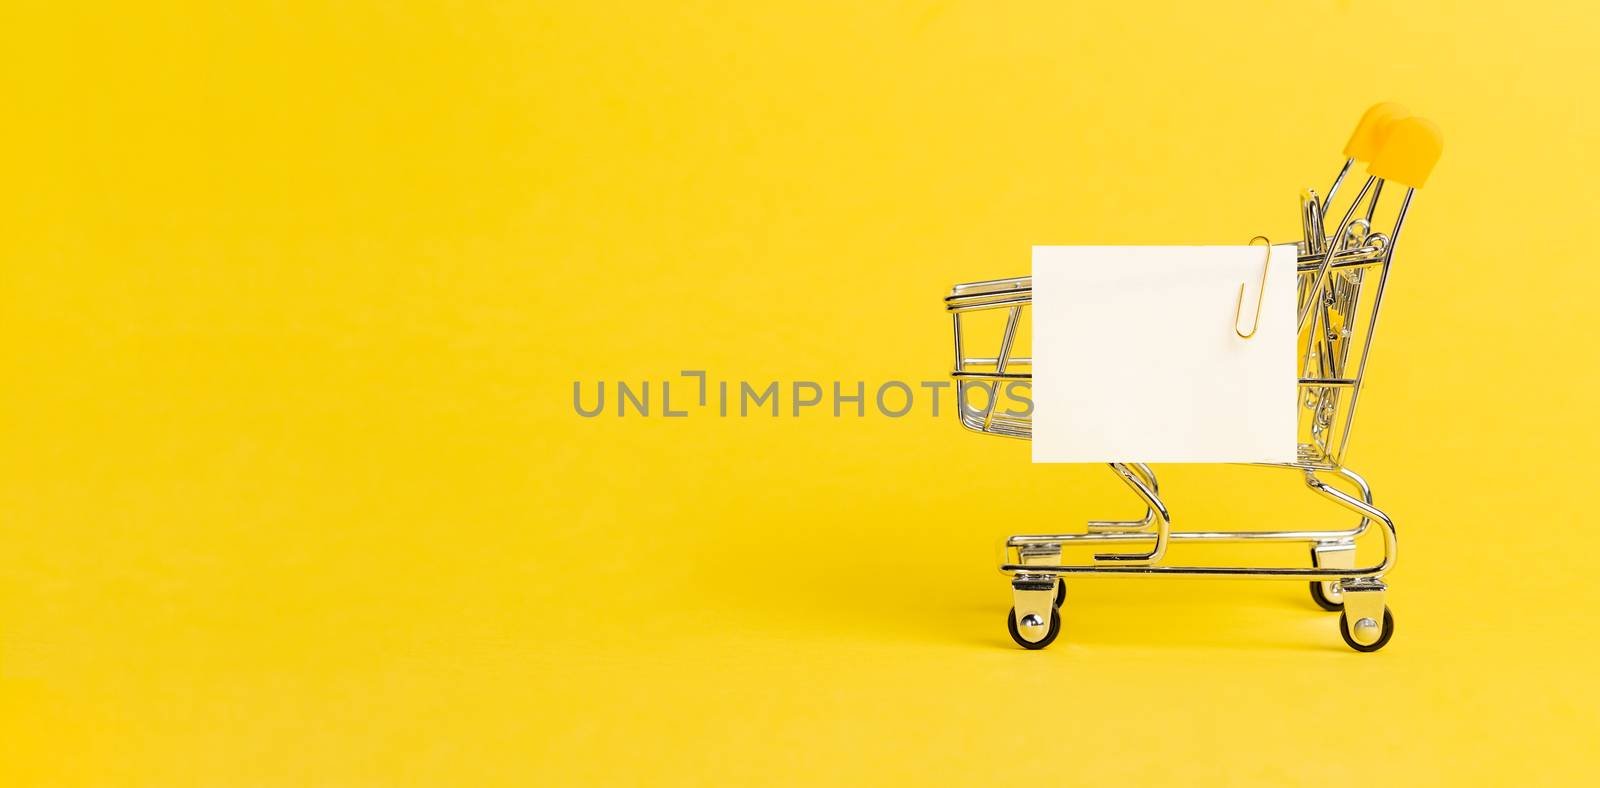 Shopping cart and white paper note list over yellow background. Shopping concept on bright yellow background. Empty white paper note over shopping cart. Copy space for text or design. Banner